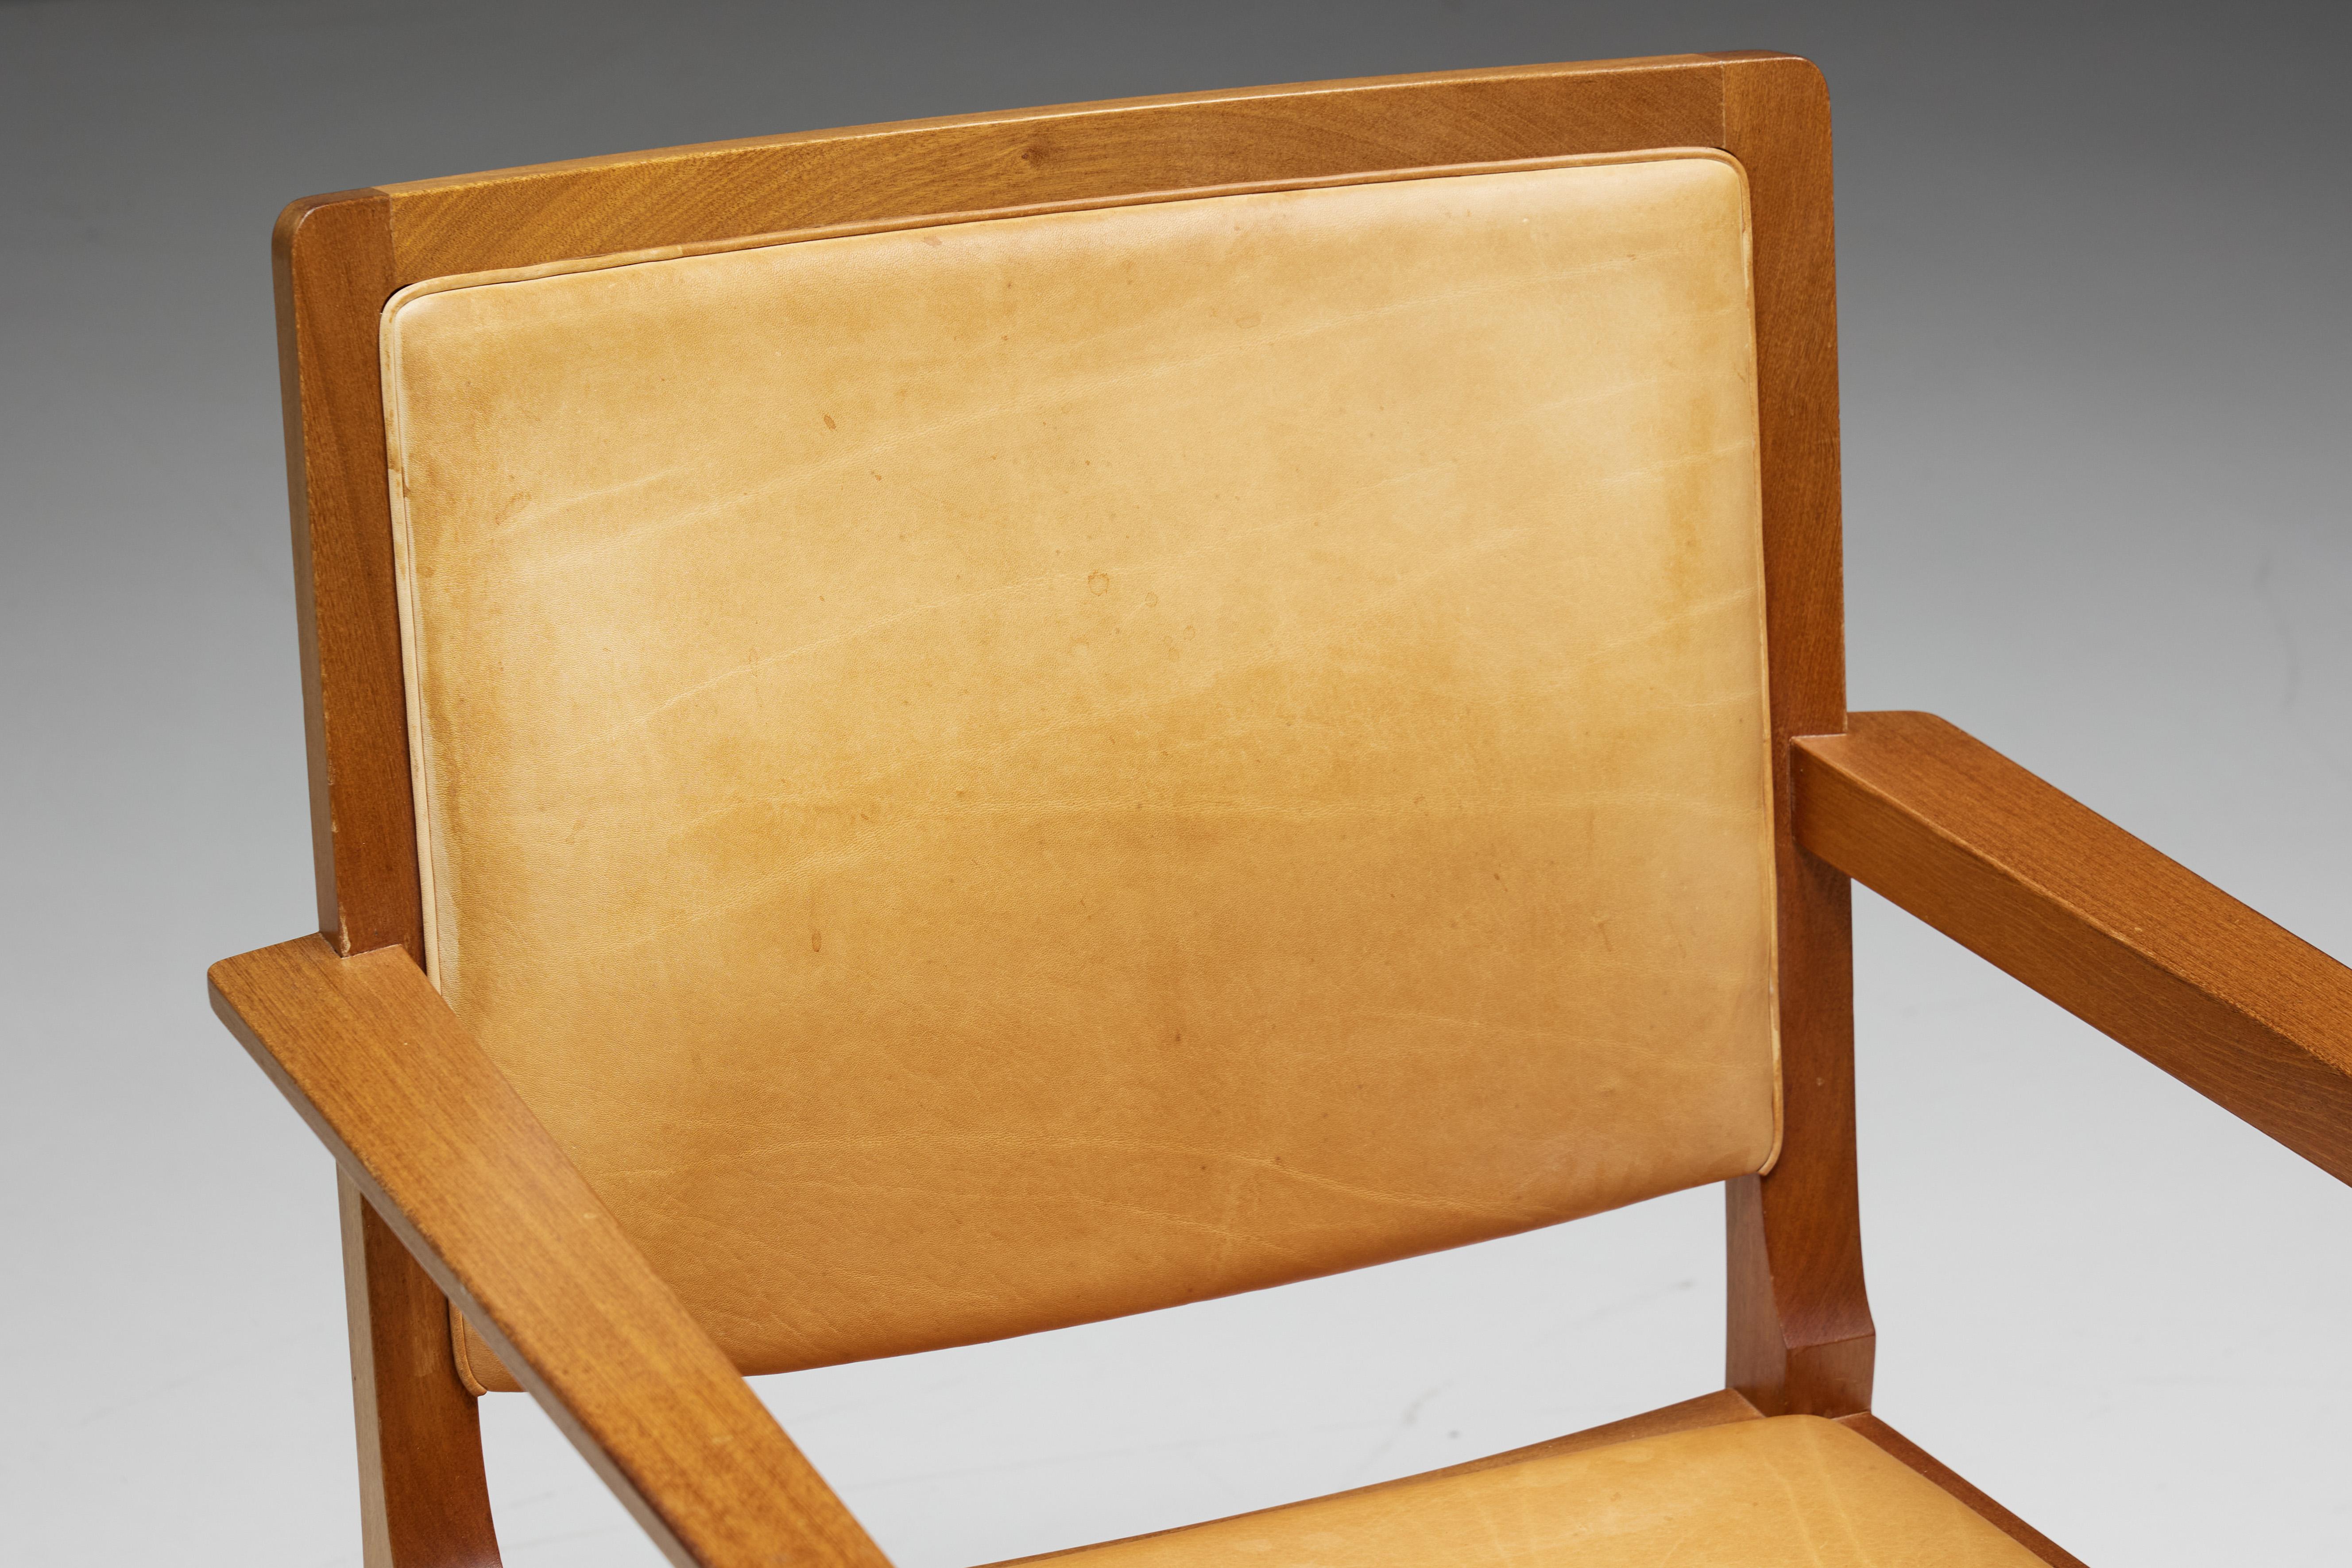 Scandinavian Conference Chairs in Natural Leather, 1970s For Sale 6